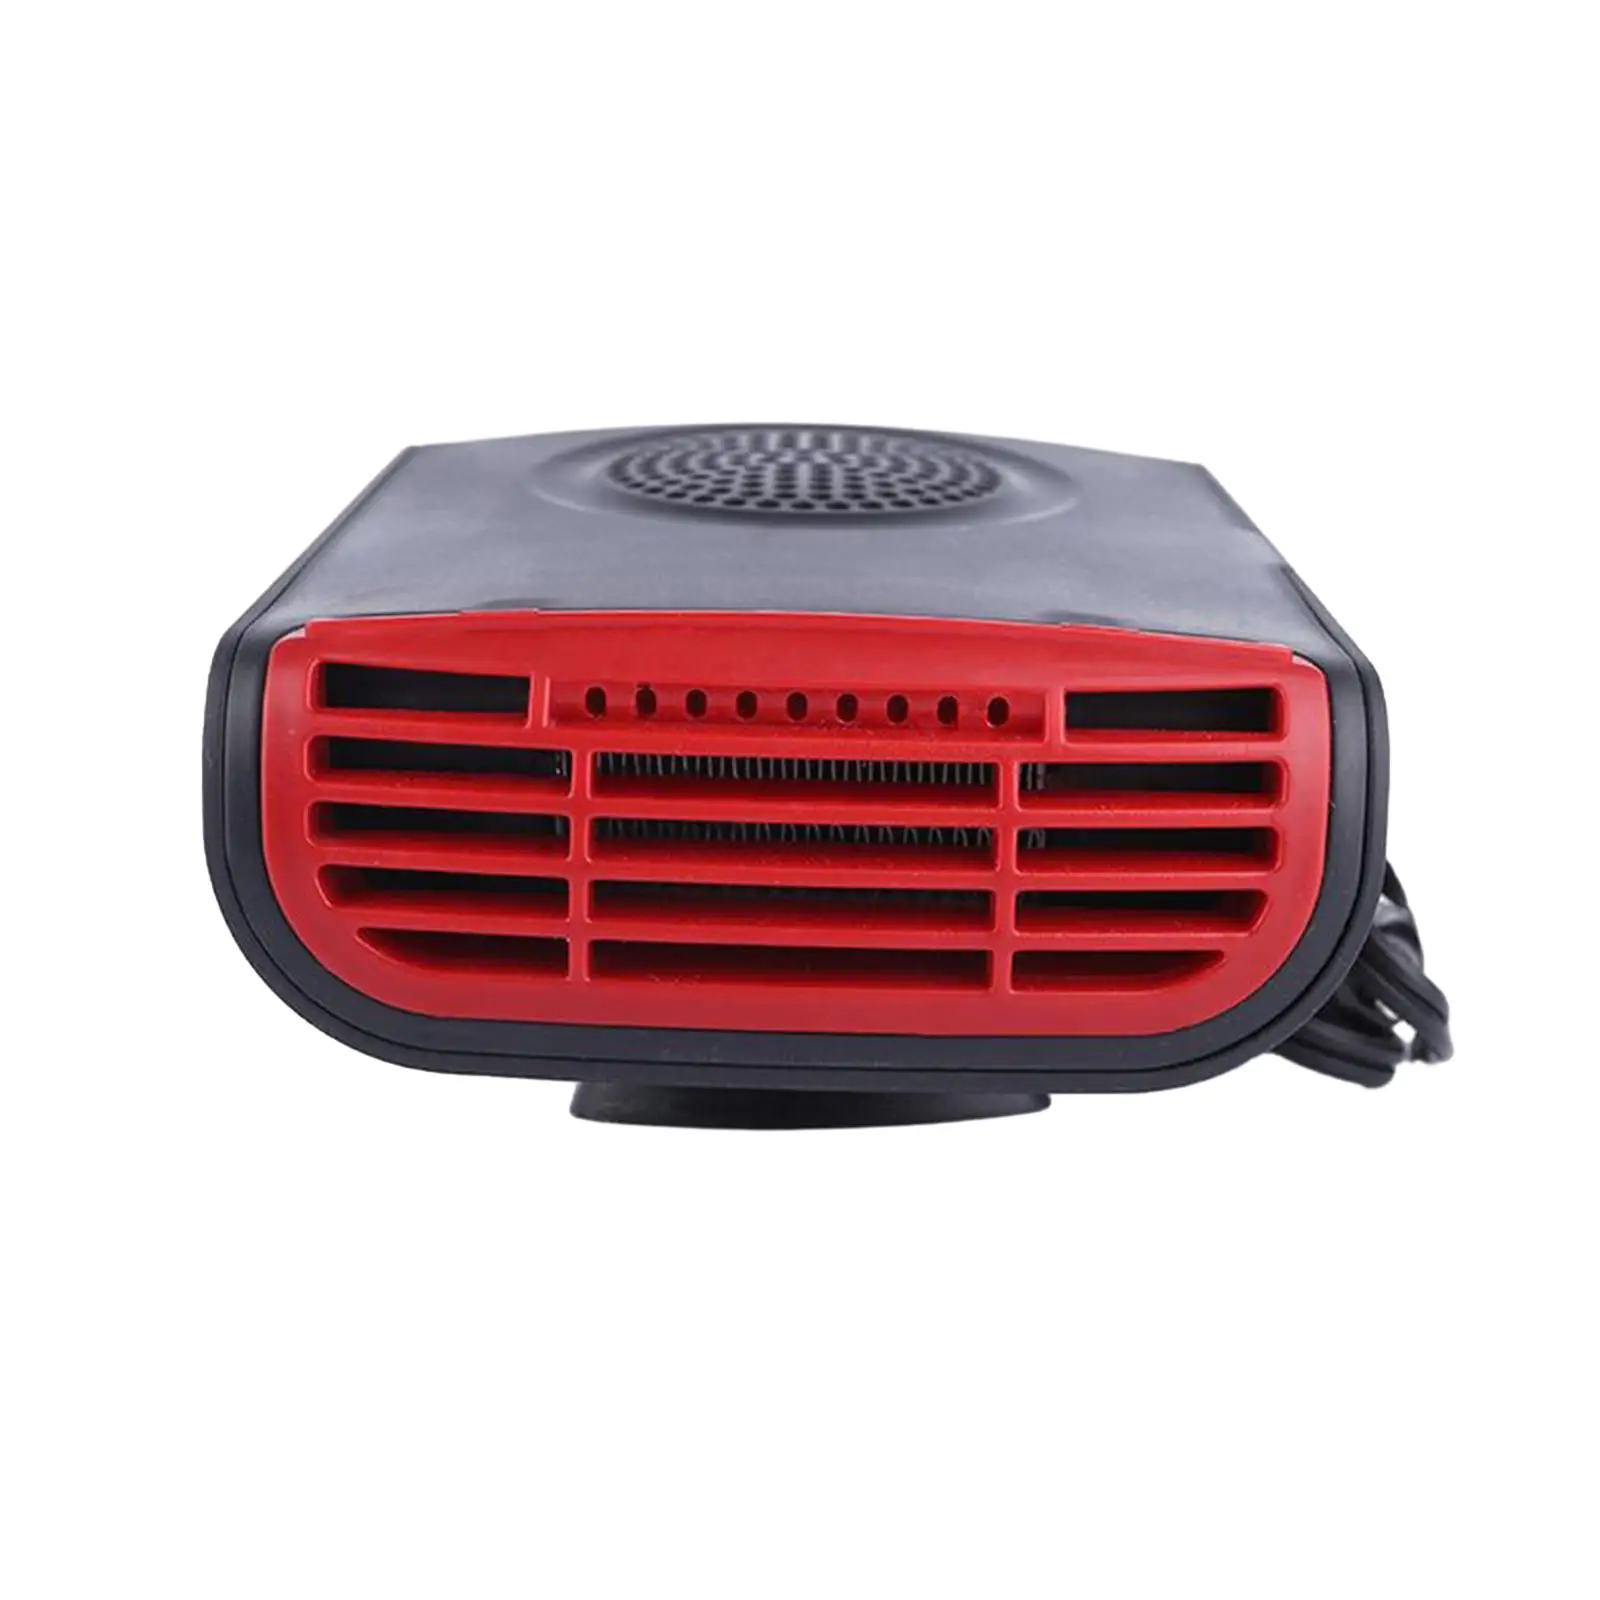 12V Car Interior Heater Fan Windscreen Defogger Rotation Windshield Defrosting for Multifunctional Accessory Easily Install